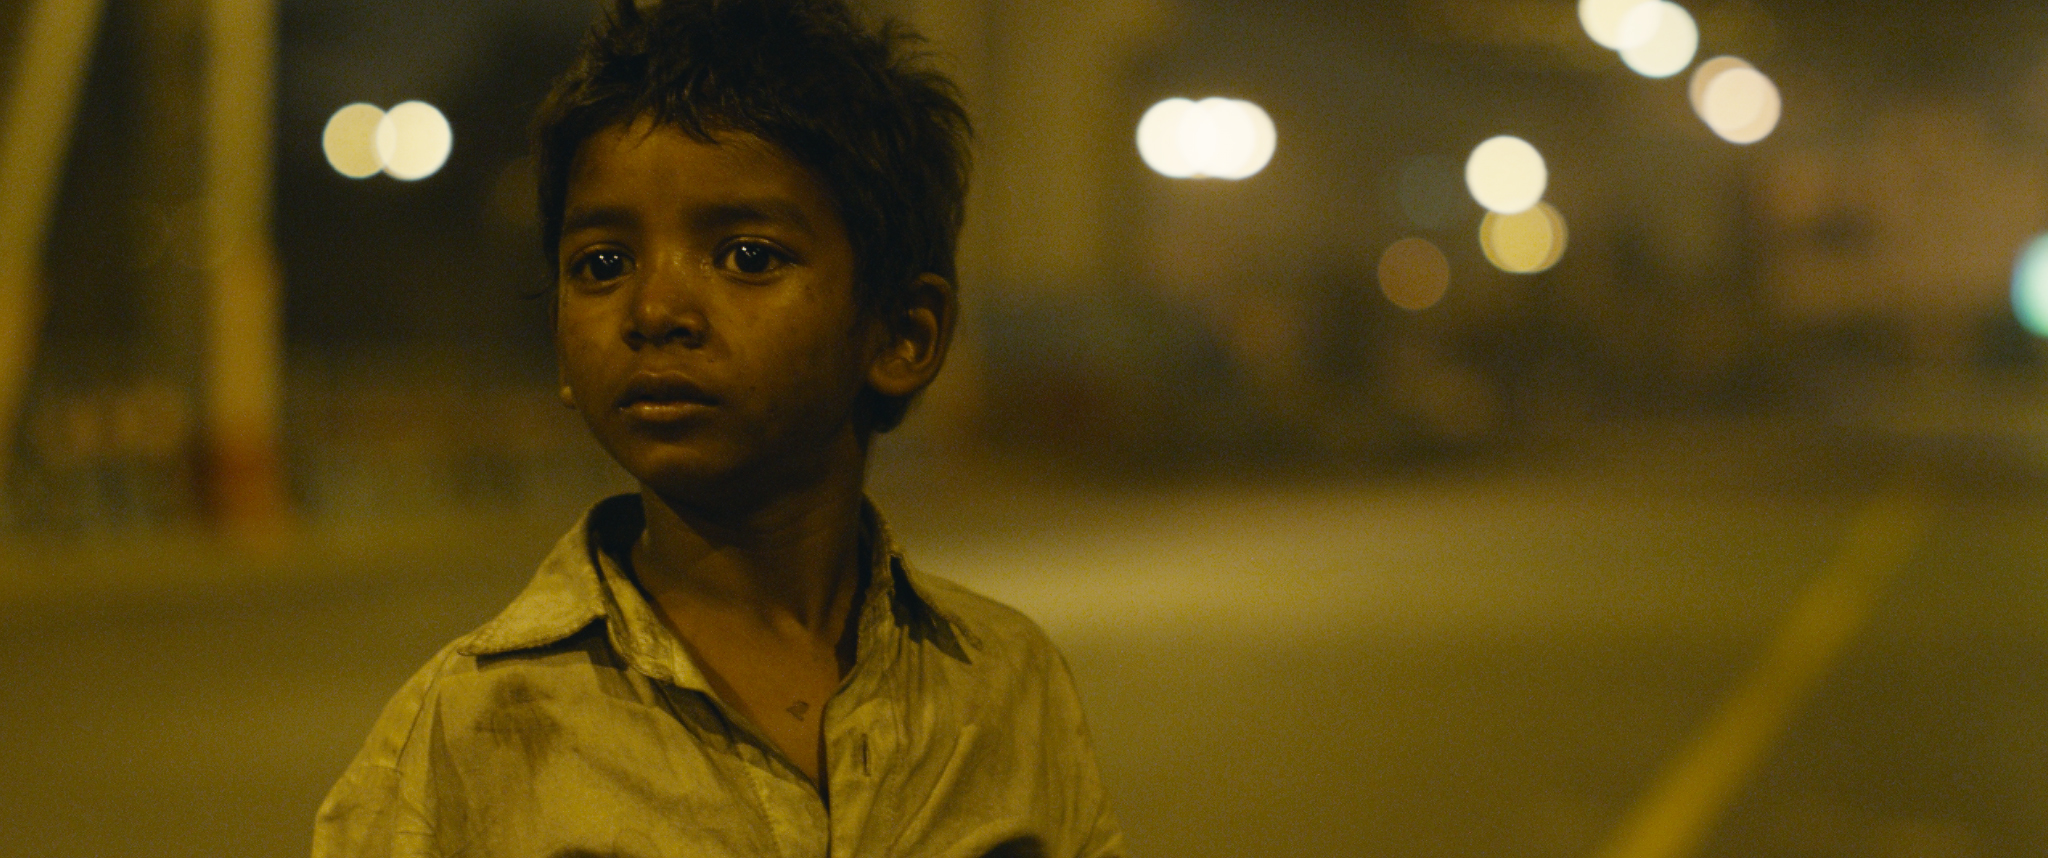 Sunny Pawar stars in LION Photo: Courtesy of The Weinstein Company